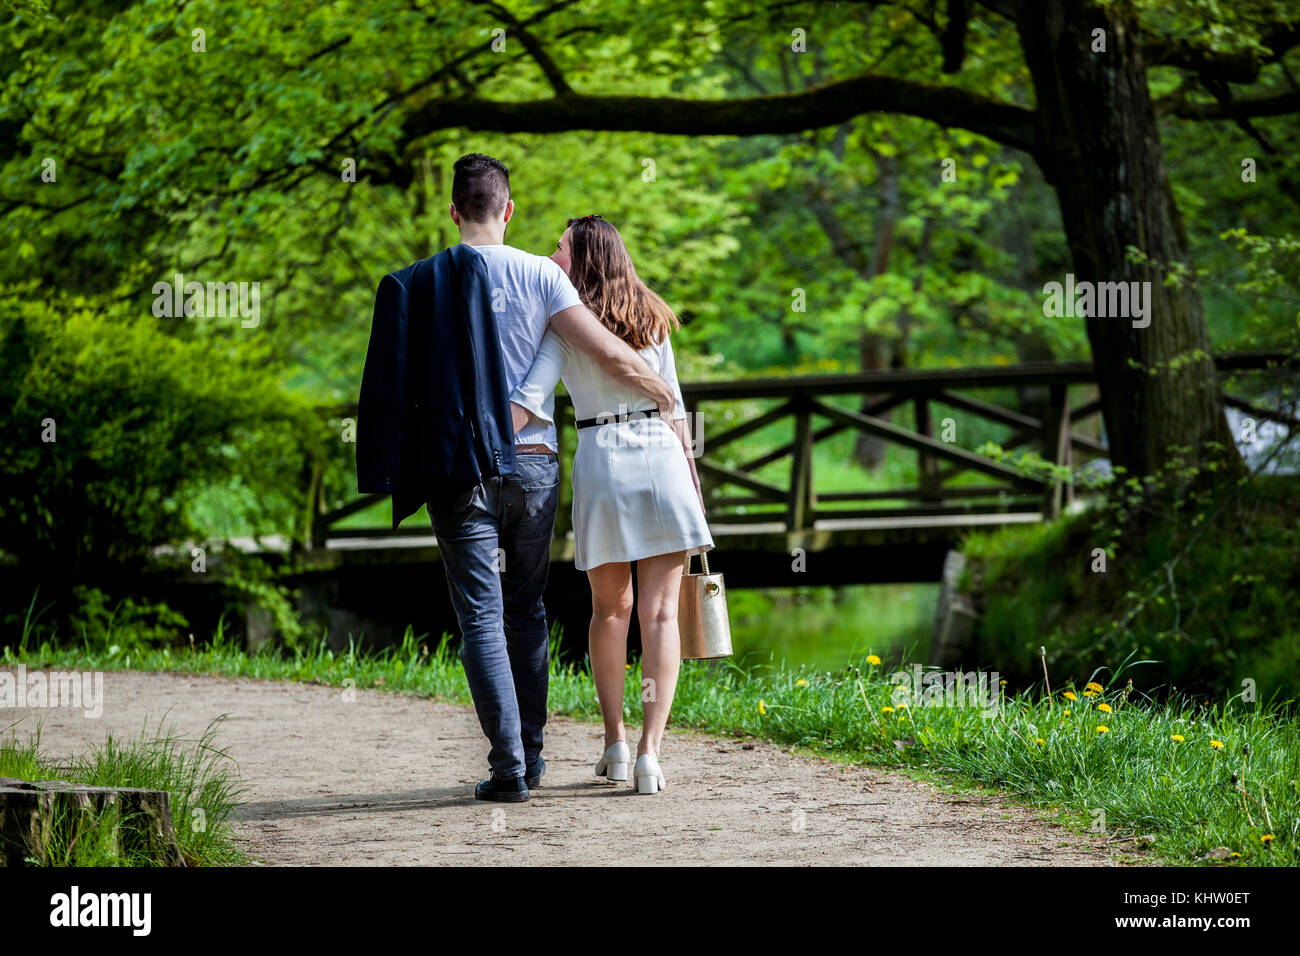 Young couple in love, Couple walking in a park, couple rear view man woman in a garden Prague romantic couple strolling park Two lovers in City park Stock Photo